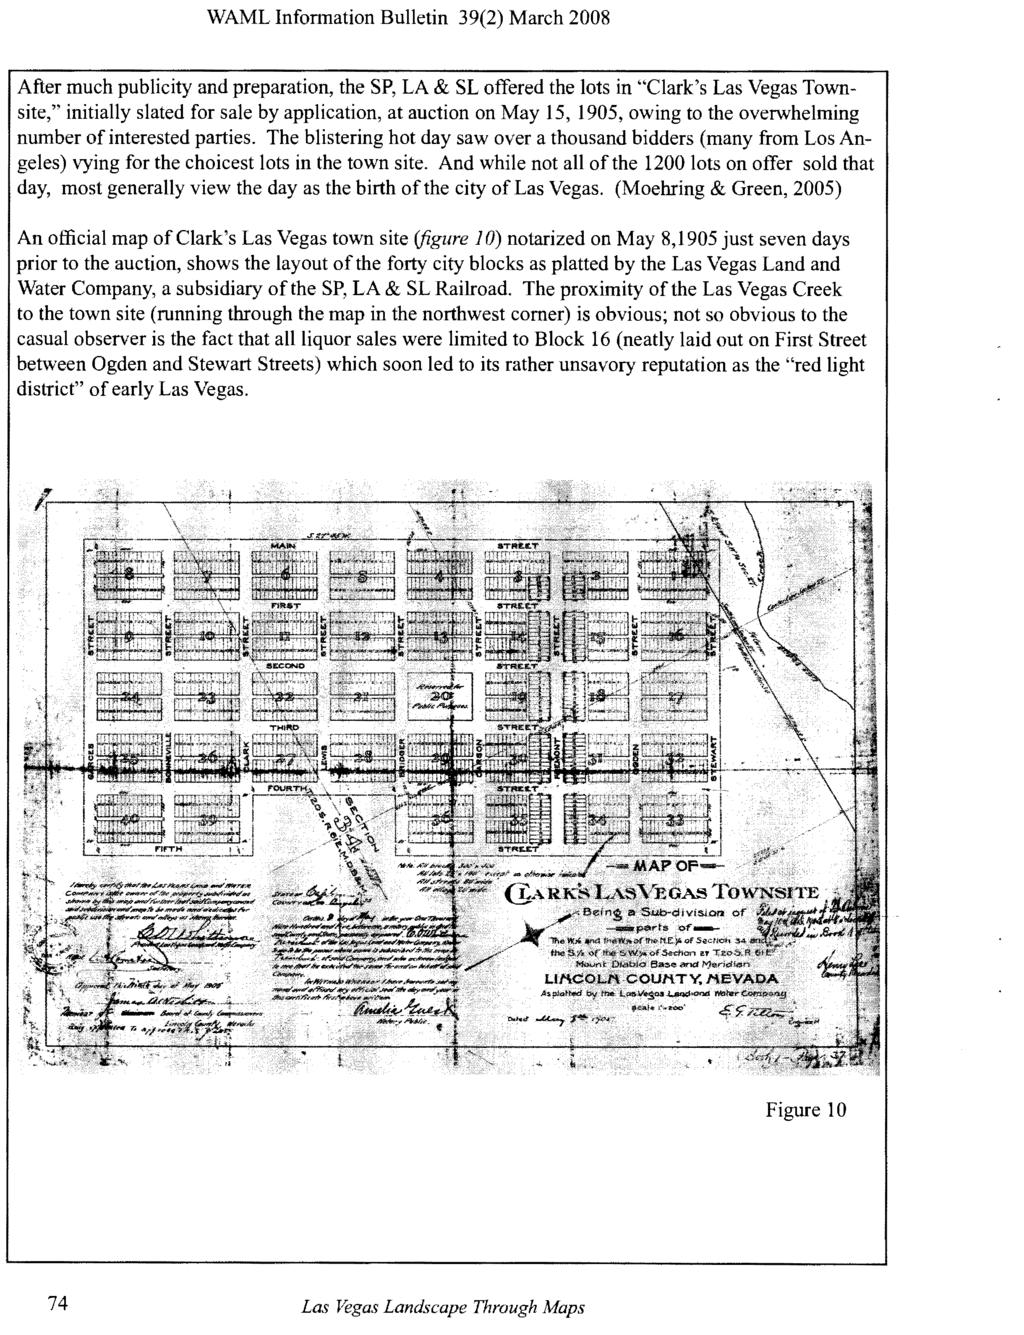 After much publicity and preparation, the SP, LA & SL offered the lots in "Clark's Las Vegas Townsite," initially slated for sale by application, at auction on May 15, 1905, owing to the overwhelming